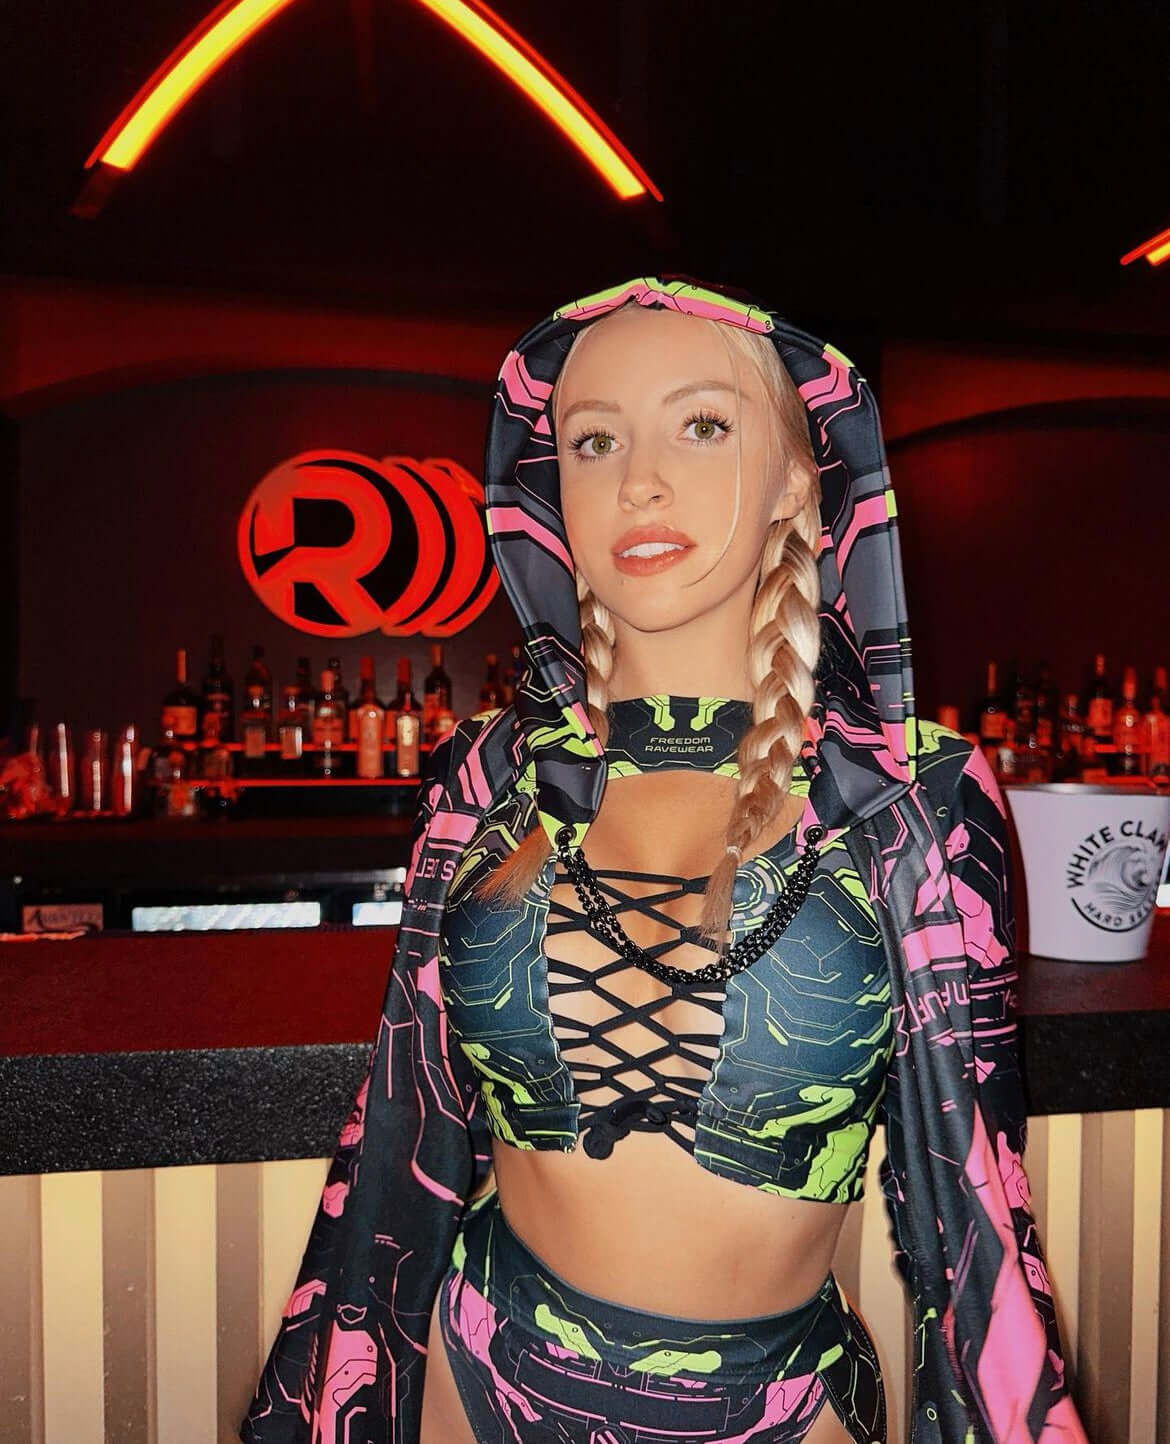 Model in a neon cyber rave outfit poses playfully at a bar with striking red neon lights in the background.